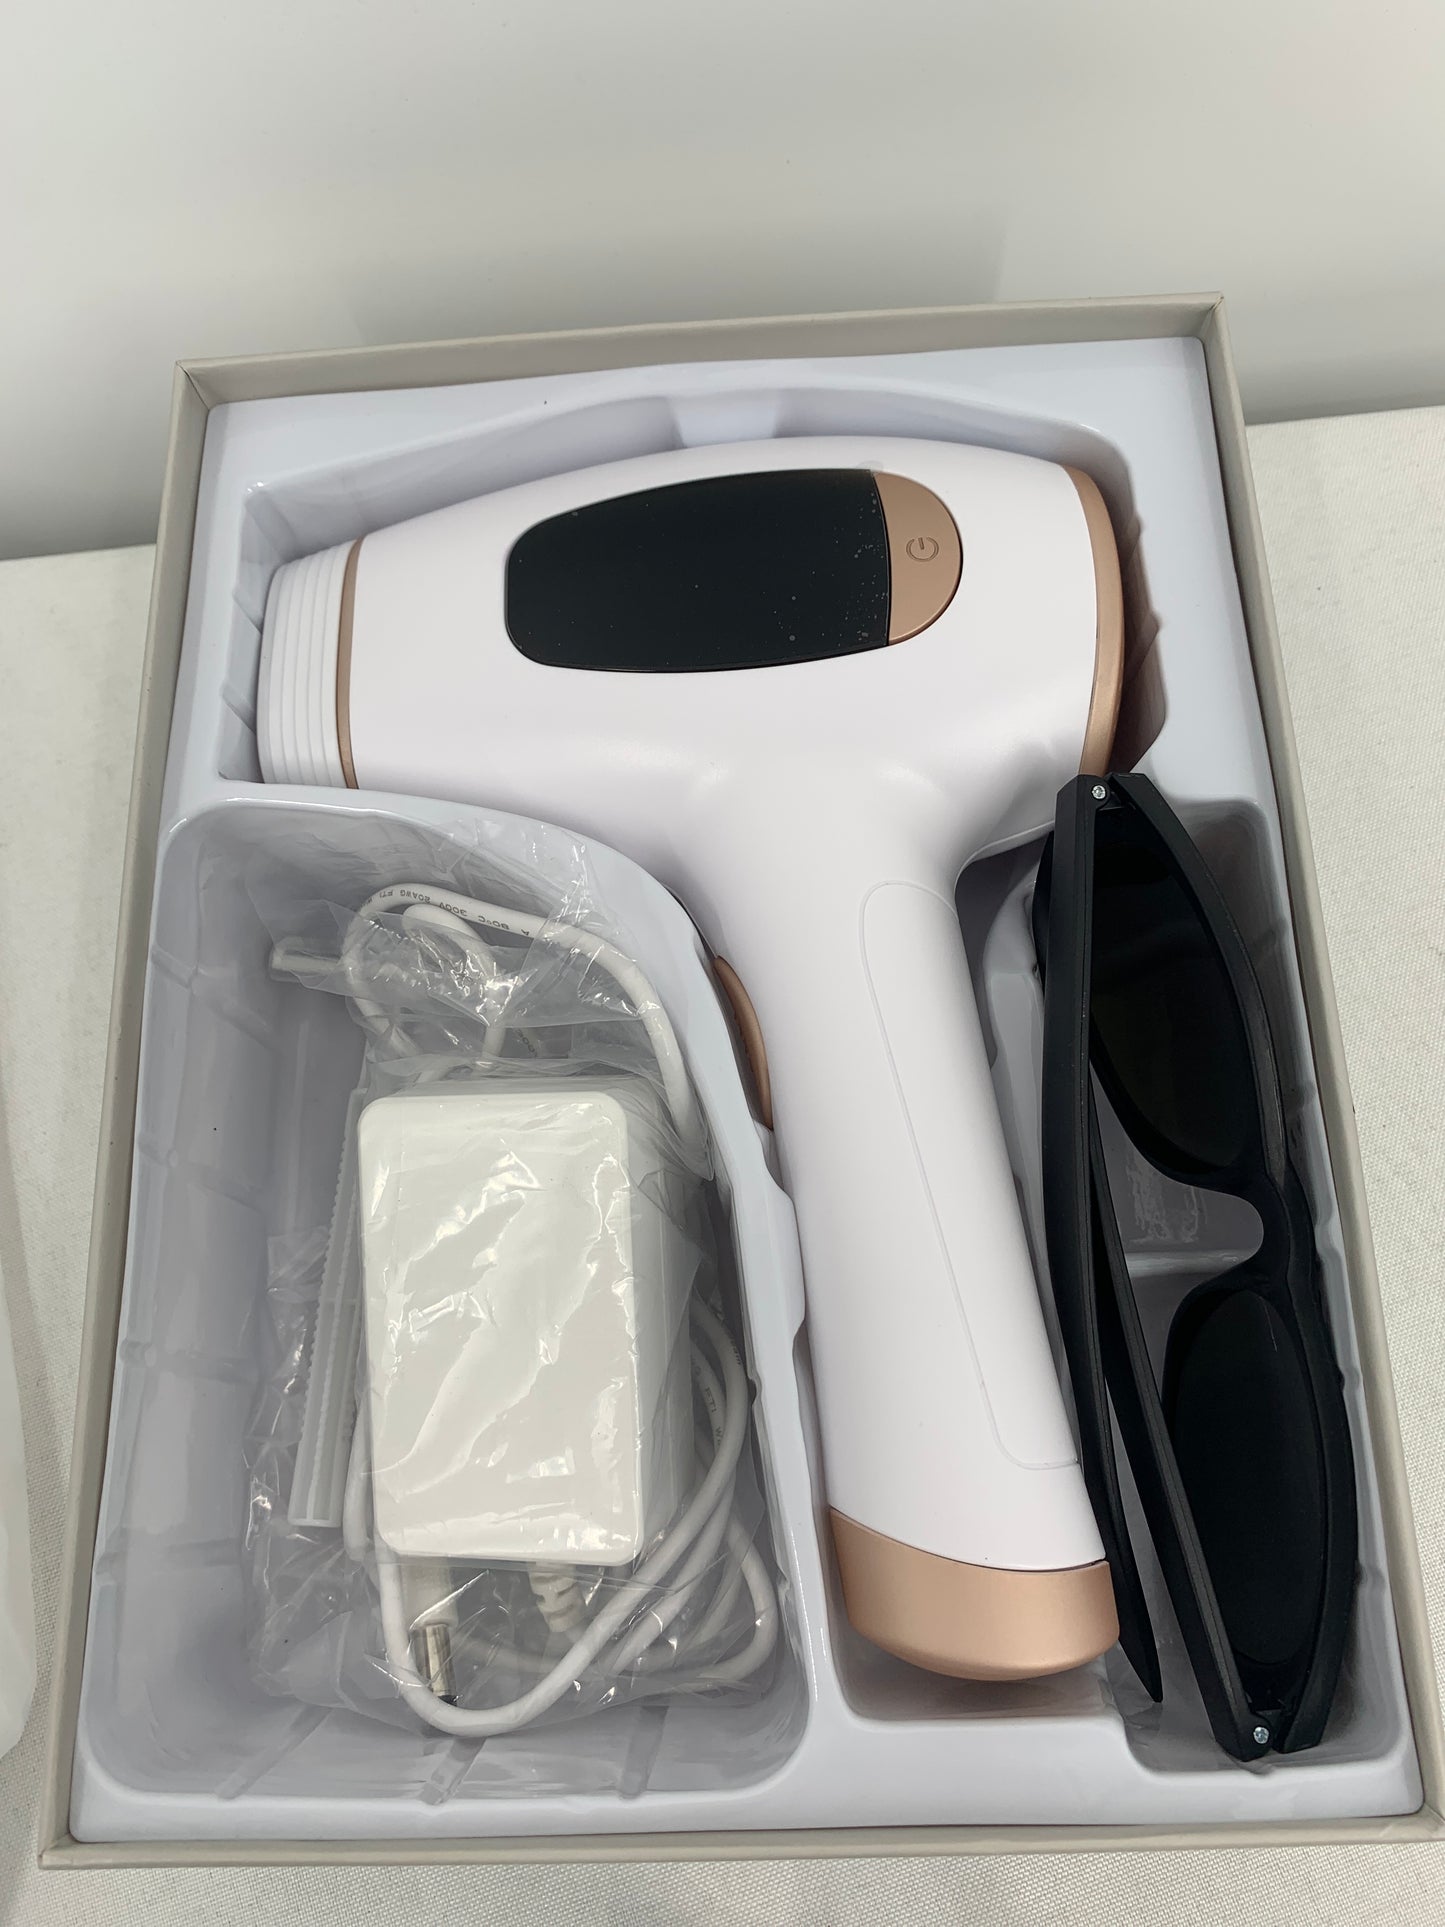 At-Home White & Gold IPL Hair Removal Device Permanent Laser Hair Removal NEW